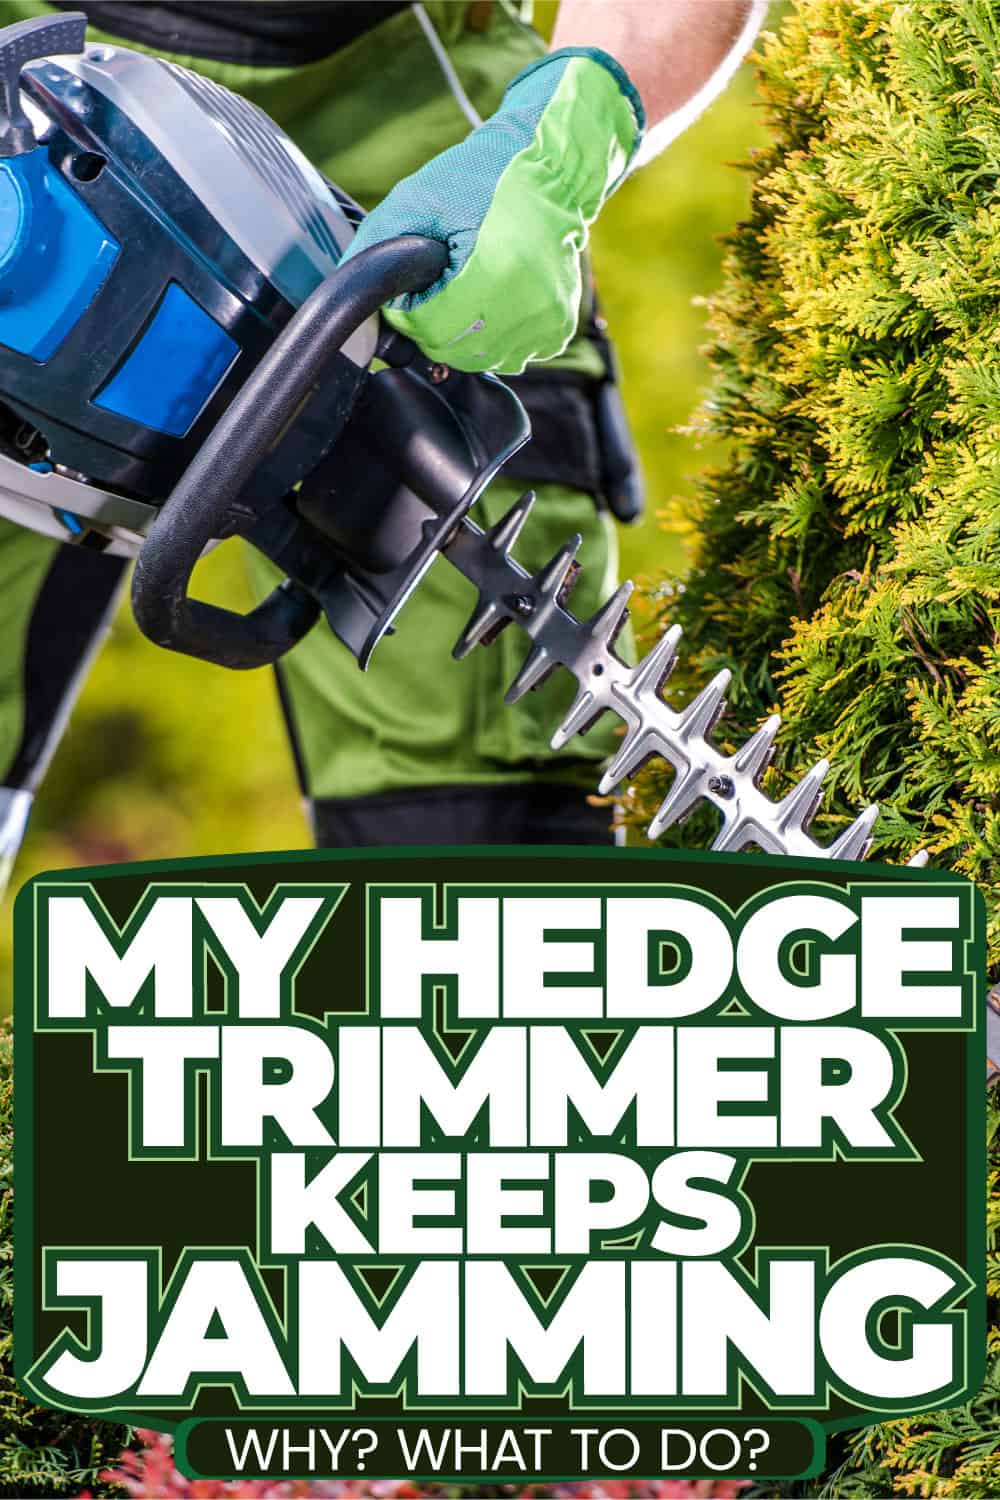 My Hedge Trimmer Keeps Jamming - Why? What To Do?